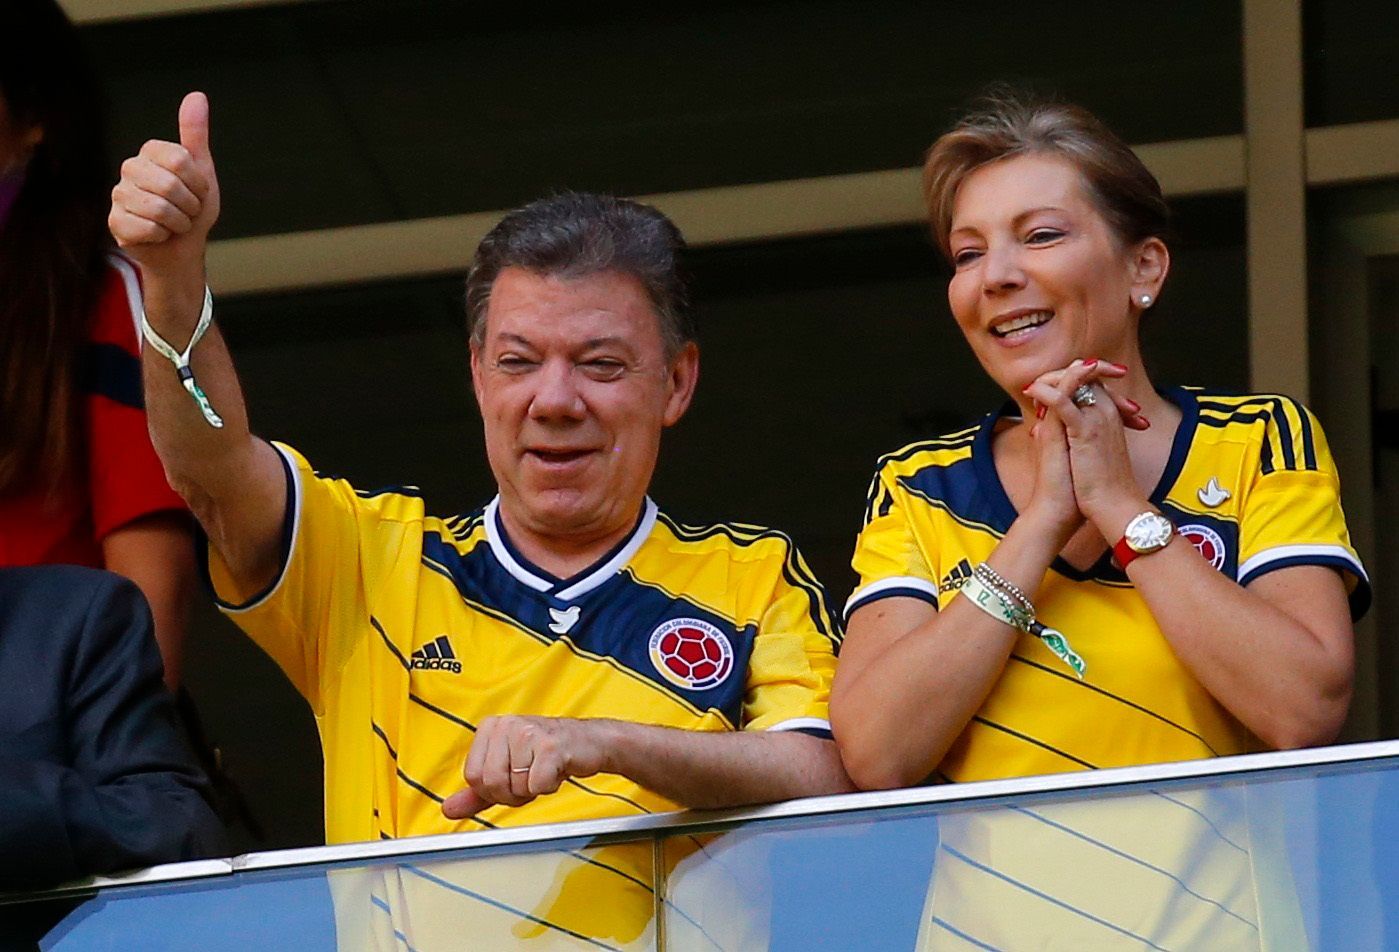 Colombia's President Santos and his wife gesture during the team's 2014 World Cup Group C soccer match against Ivory Coast in Brasilia